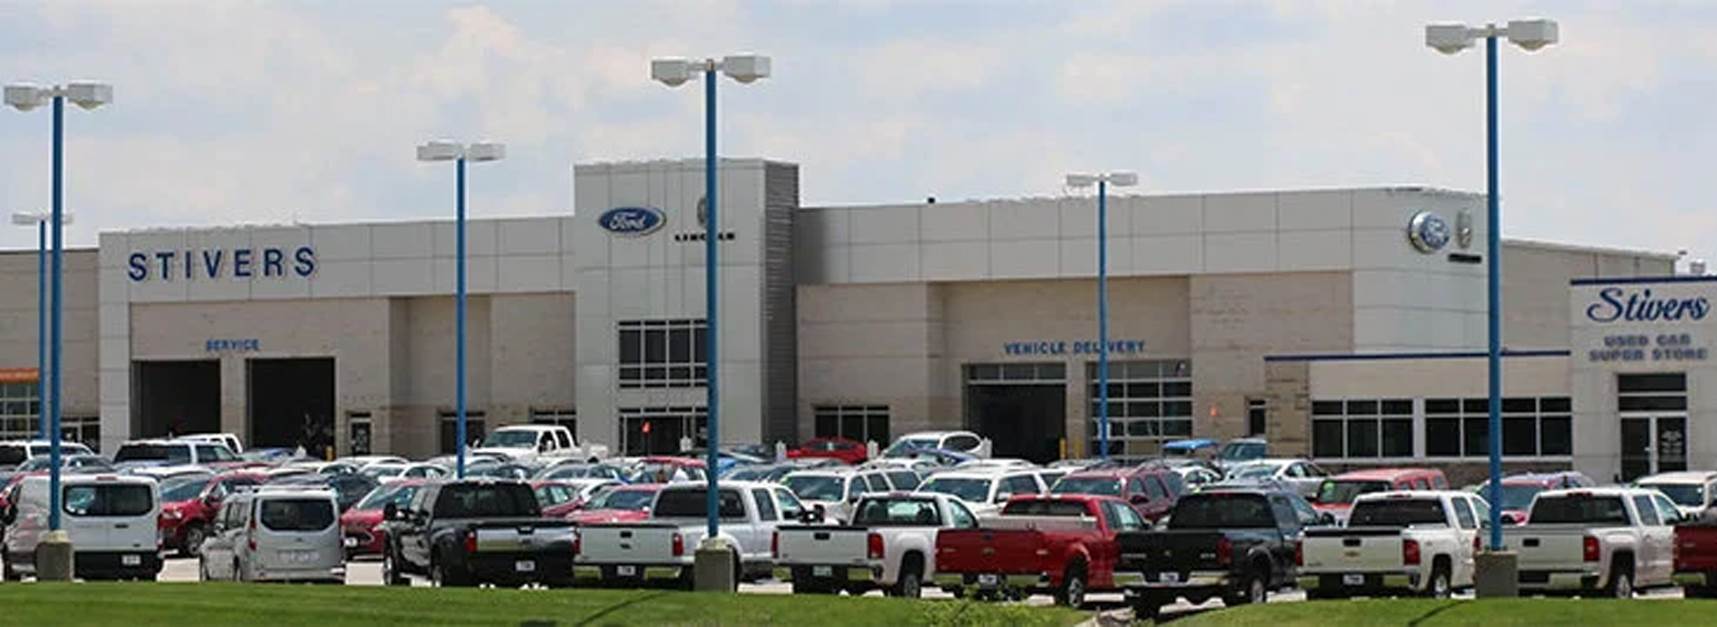 Stivers Ford Lincoln of Iowa